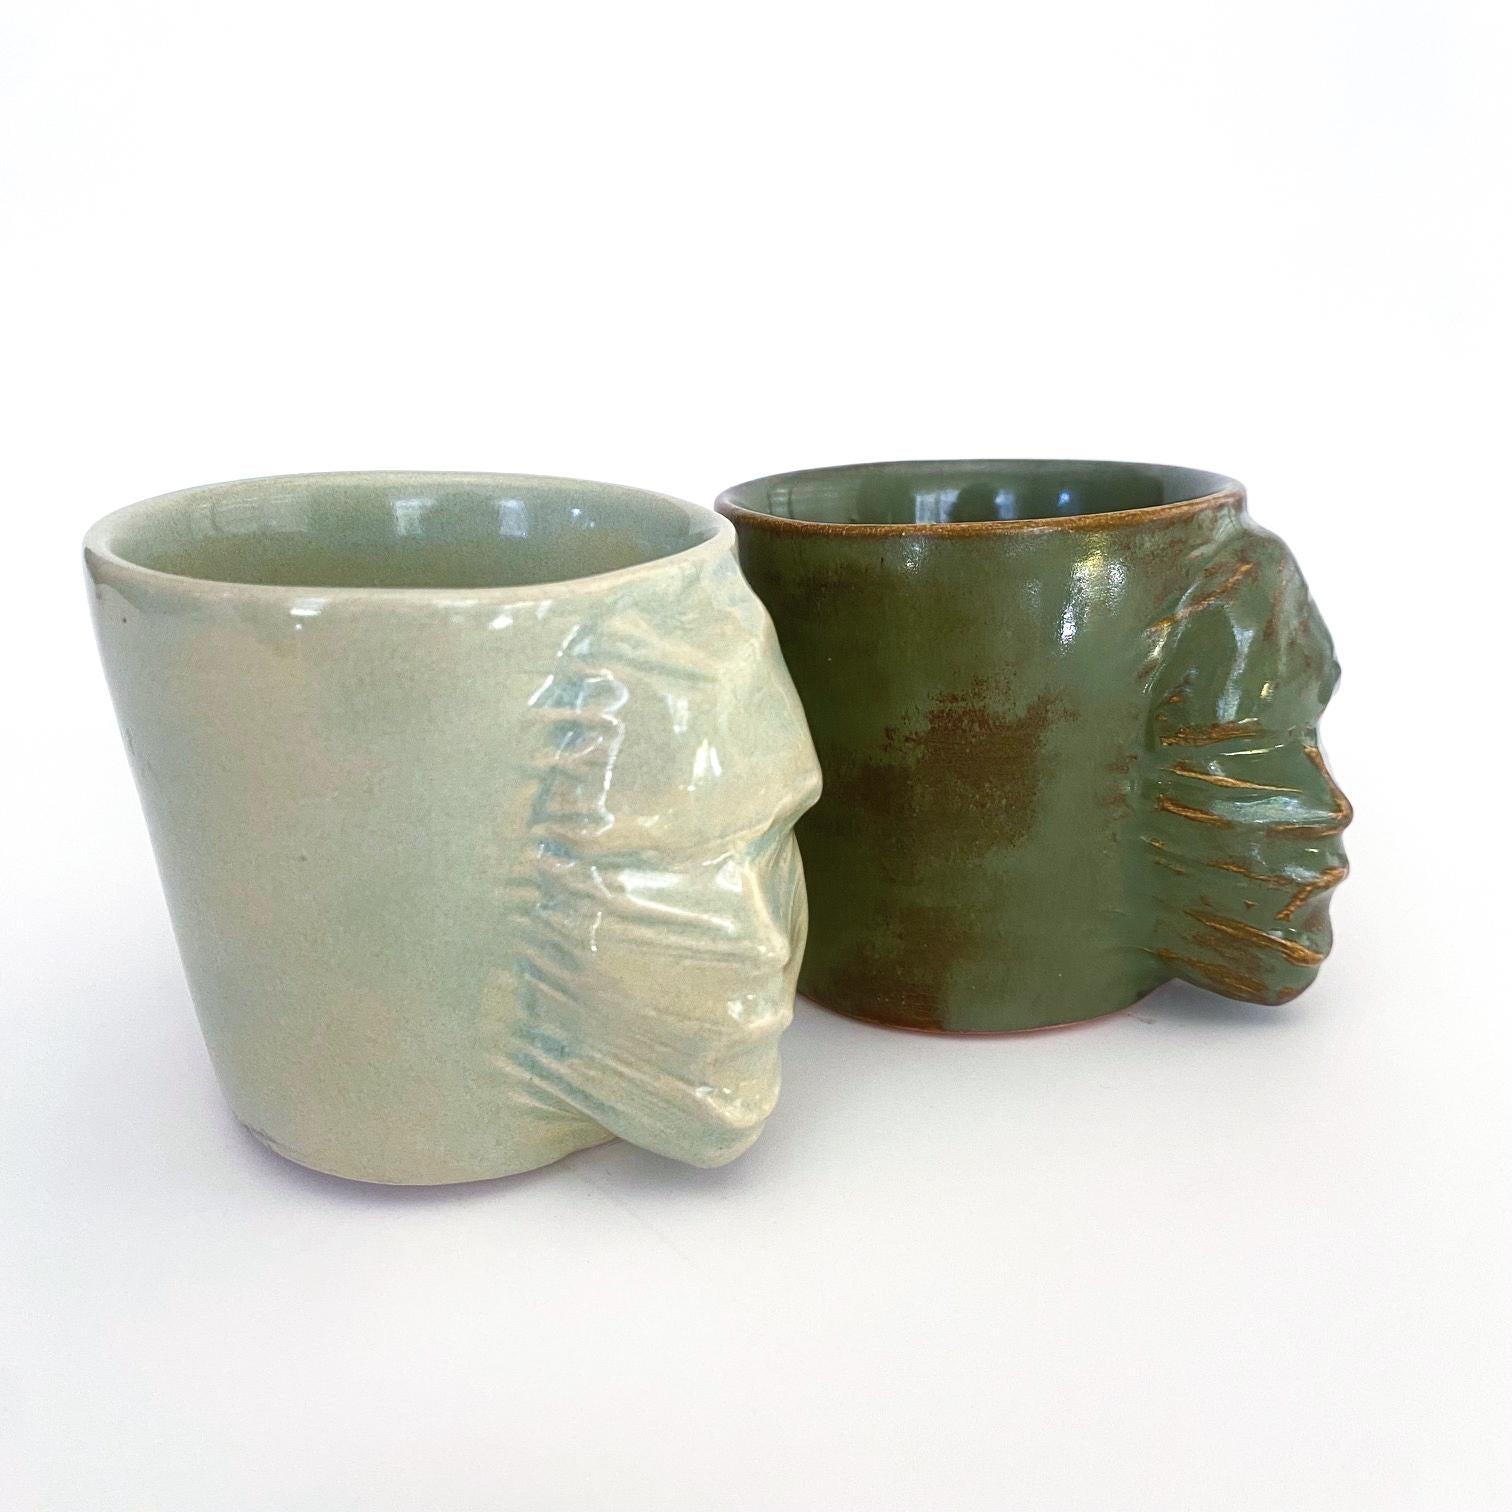 Turkish Sculptural Ceramic Cups Set of 2 by Hulya Sozer, Face Silhouette, Earthly Greens For Sale